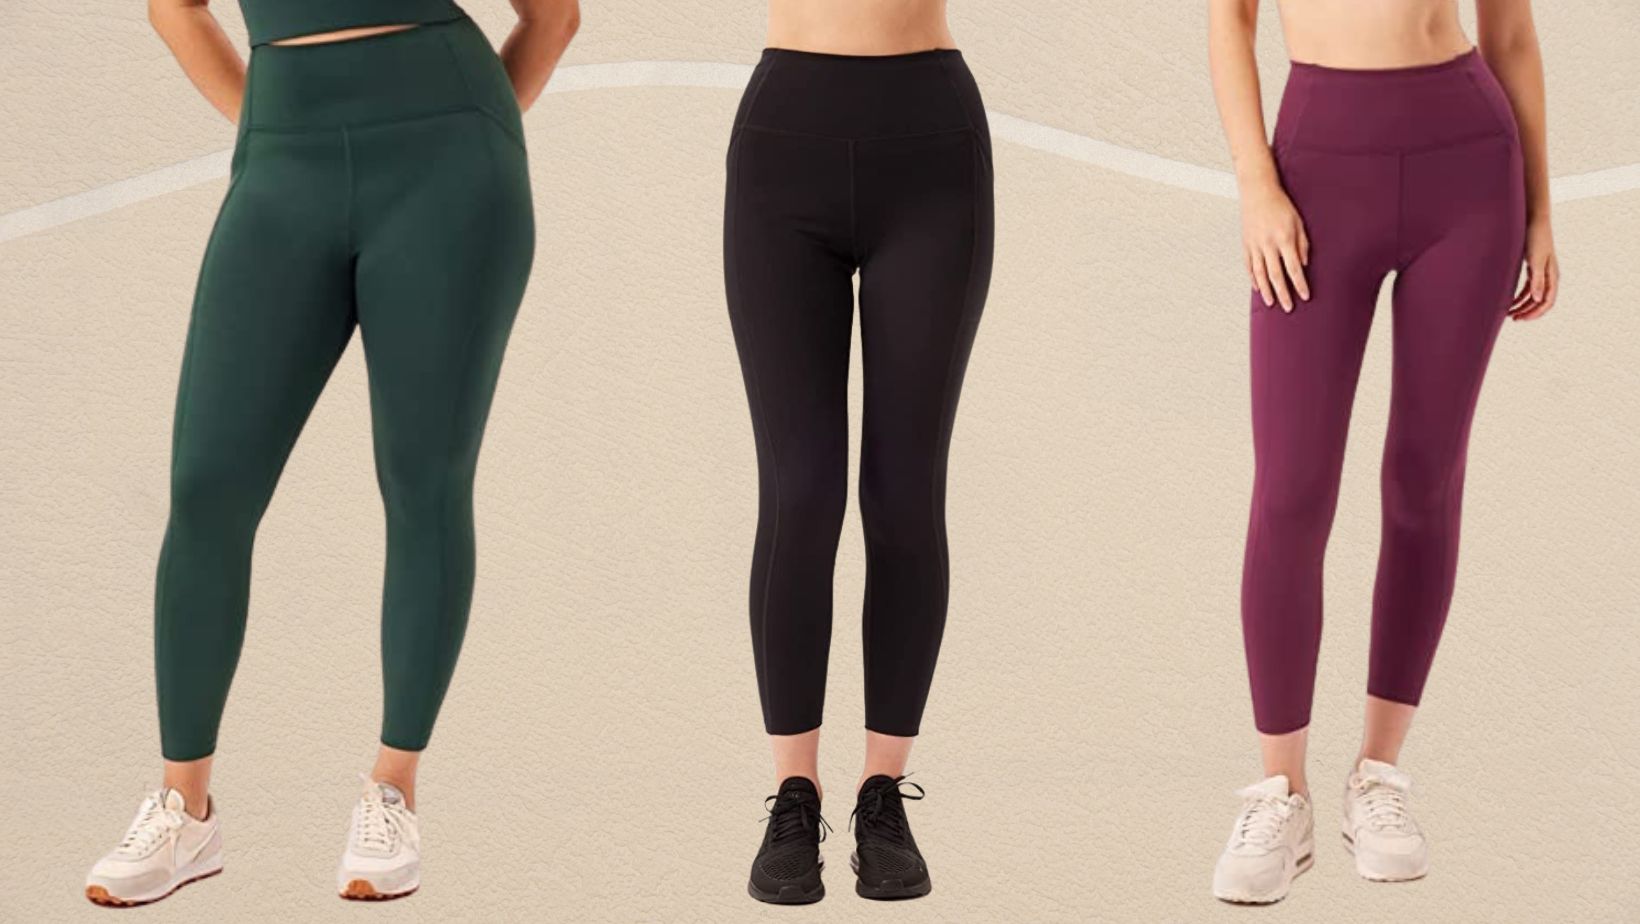 The Amazon Leggings With Over 48,000 Perfect Ratings Just Went on Sale